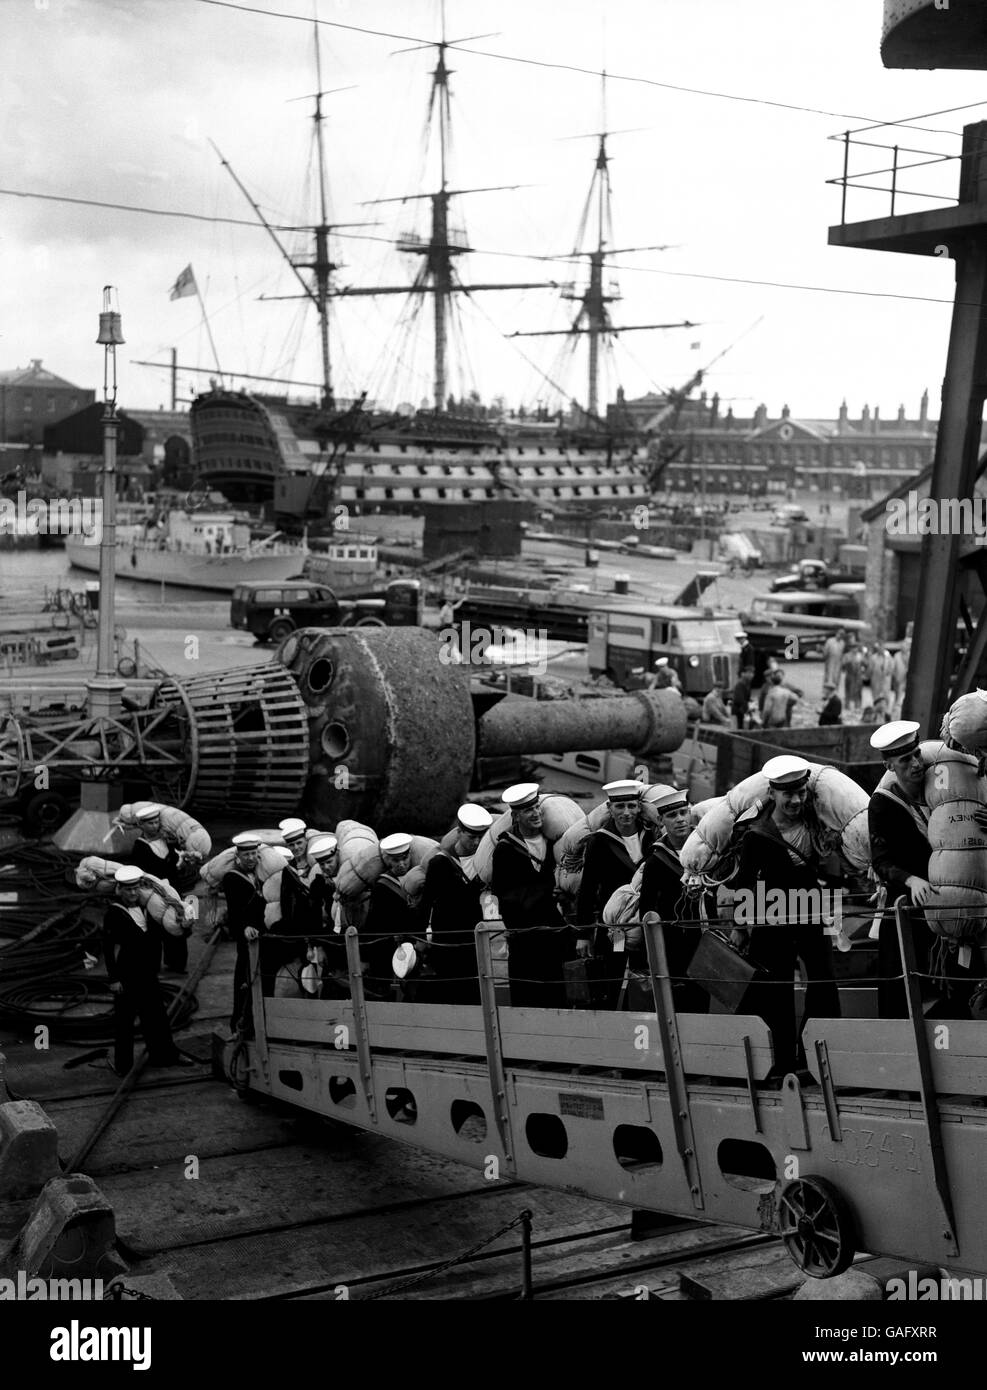 Sailors of the British Navy board the aircraft carrier 'Warrior' at Portsmouth. They are to relieve sailors already on duty in the Far East waters. In the background is H.M.S. Victory. Stock Photo